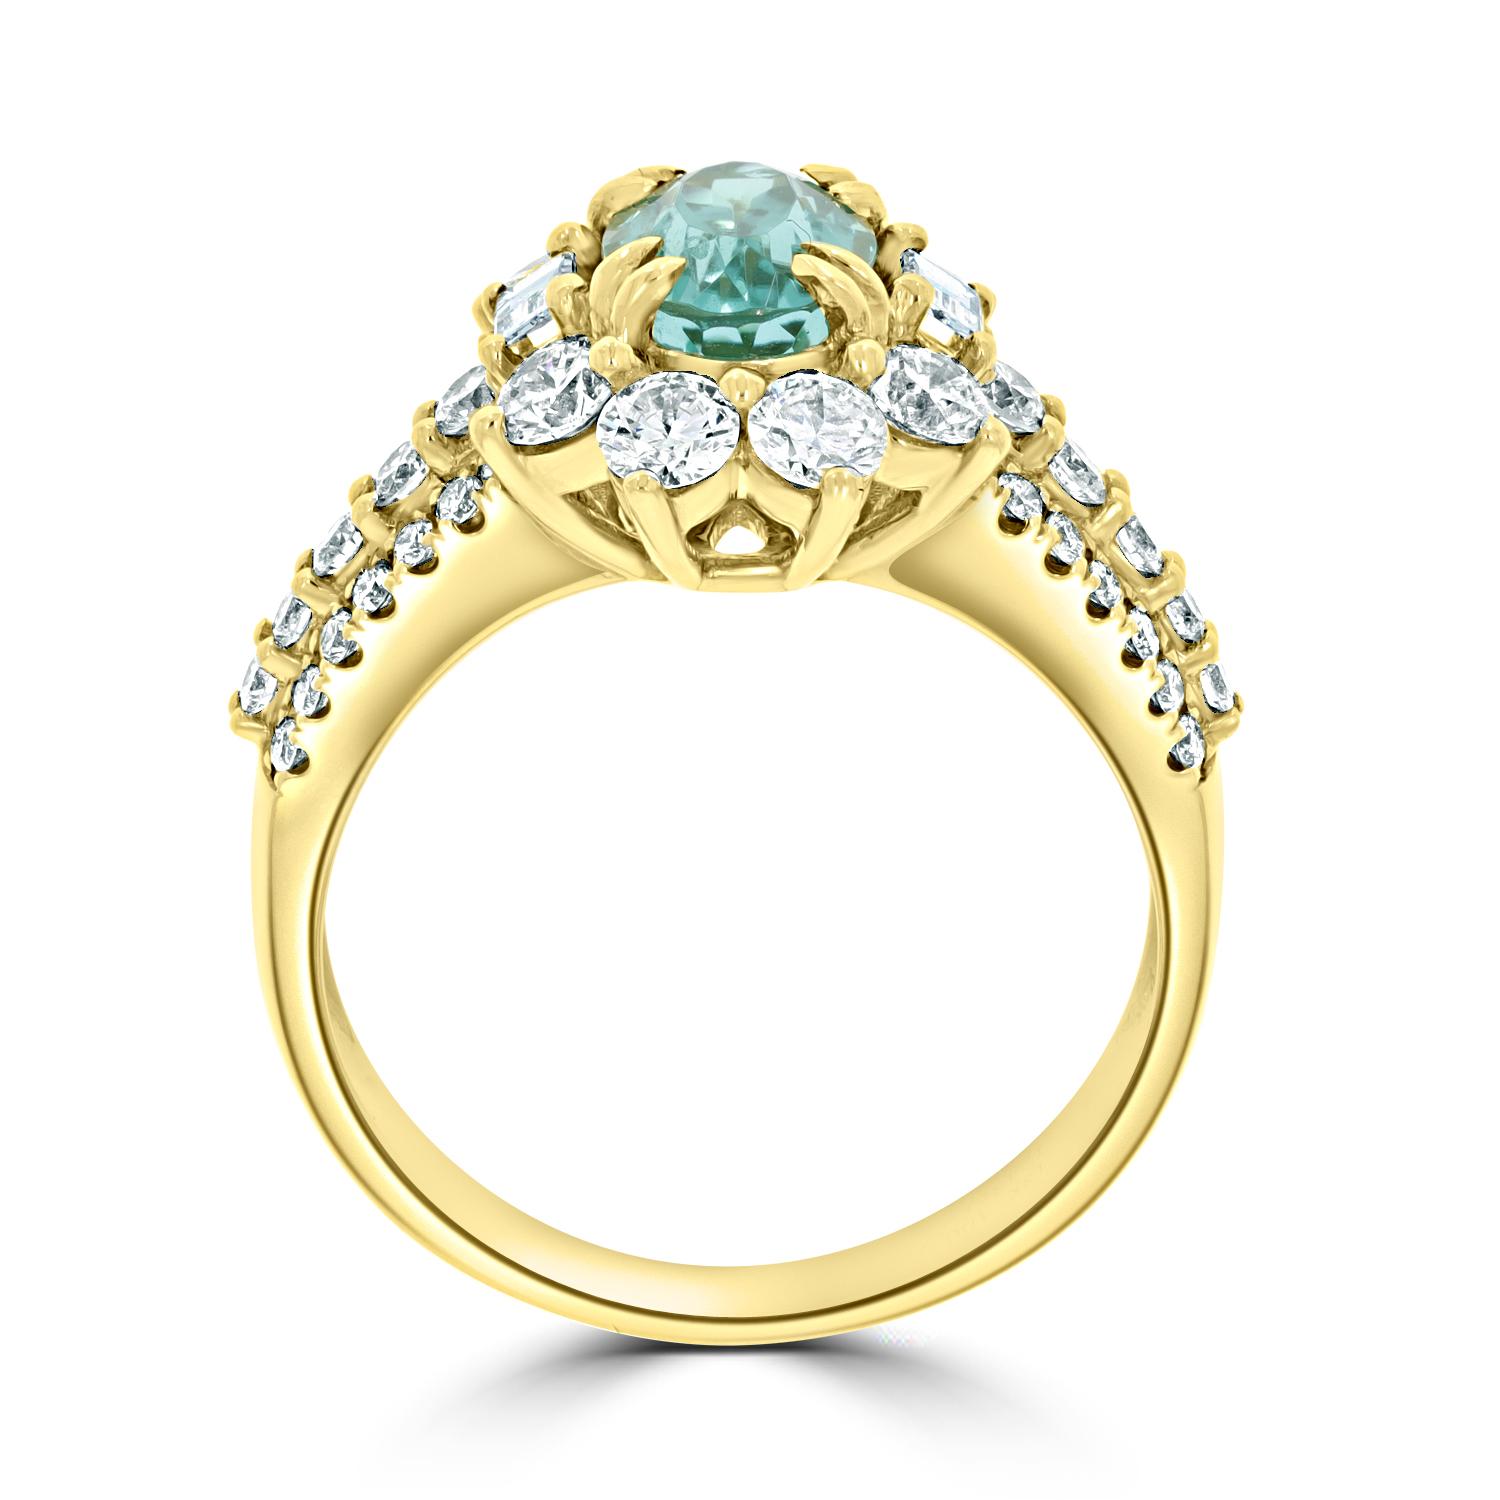 Introducing a stunning piece of jewelry that is sure to captivate anyone who lays eyes on it, the Brazilian Paraiba Tourmaline Ring with Diamonds. This exquisite ring features a 1.49 carat oval-shaped Paraiba tourmaline, sourced from Brazil and